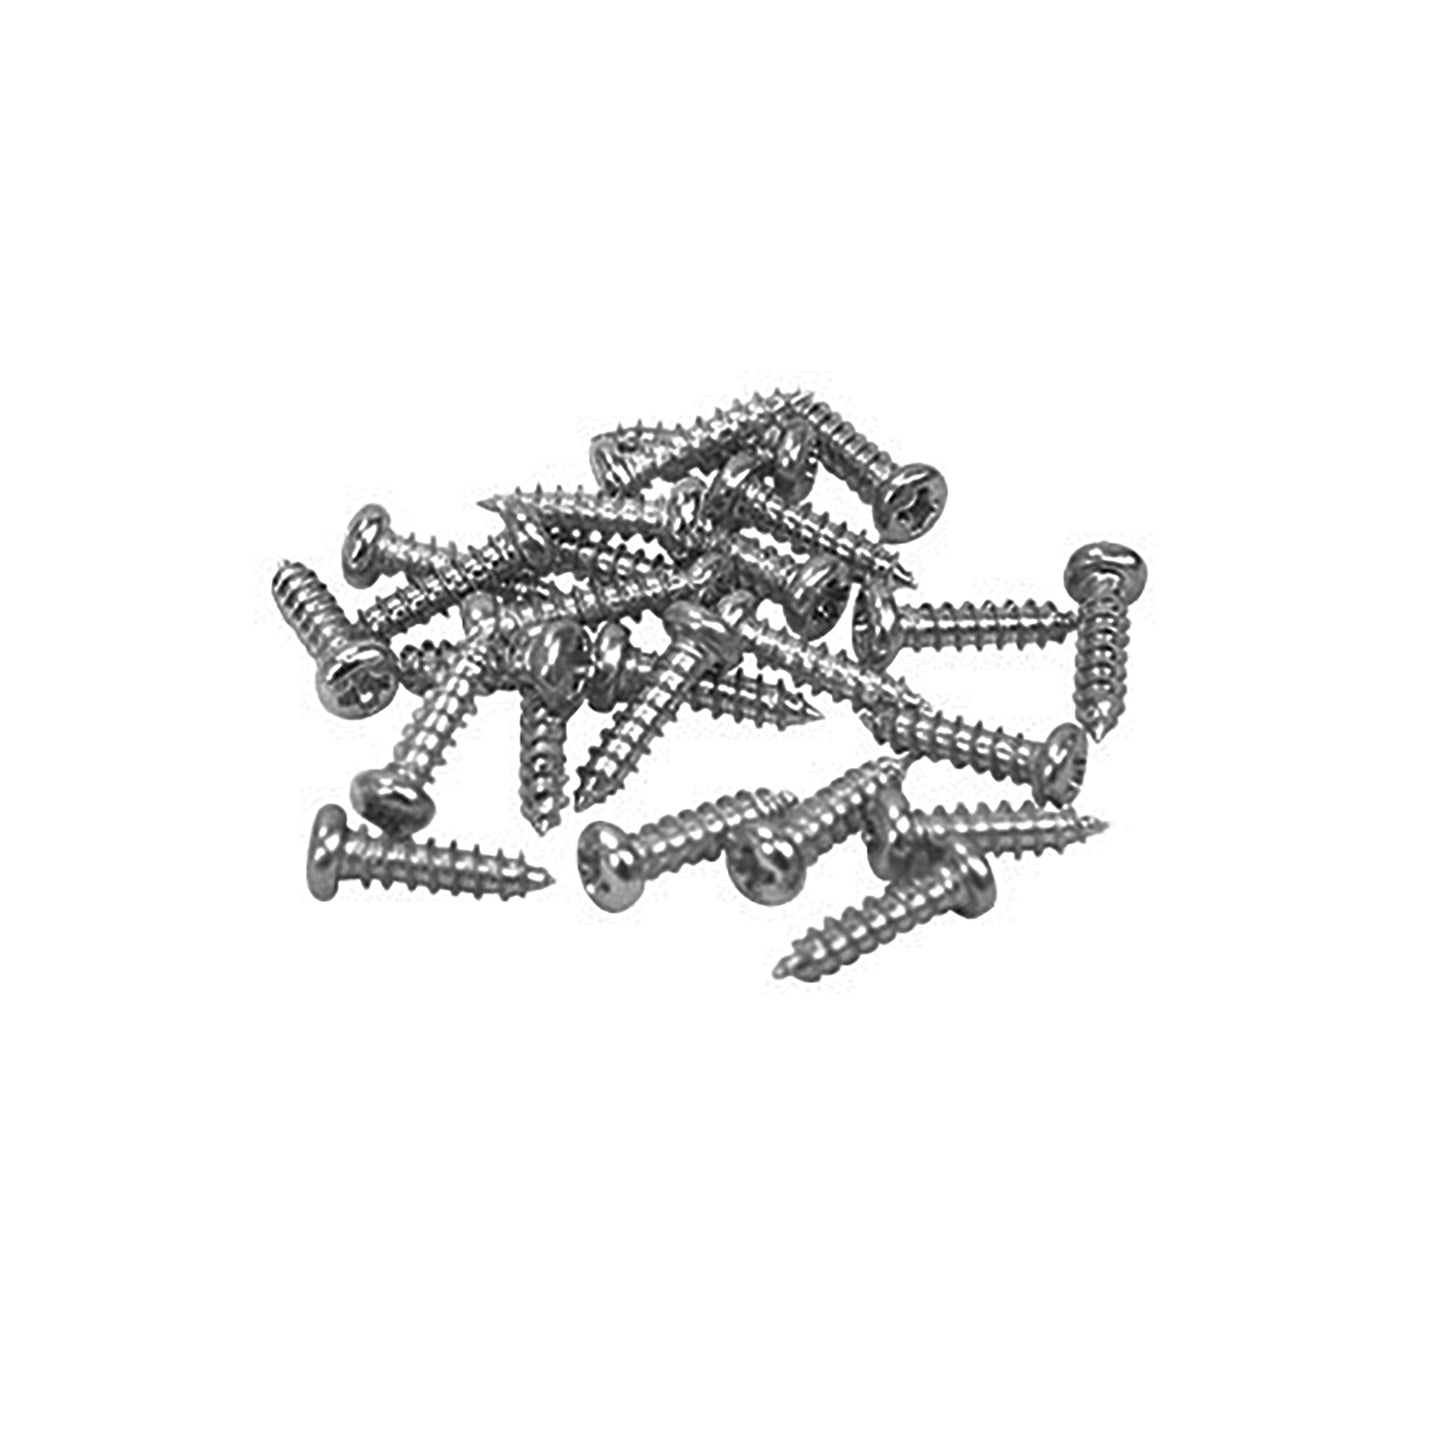 Pan Head Phillips Self- Tapping Screw for Housing Assembly for BR-252A Inflatable Blower